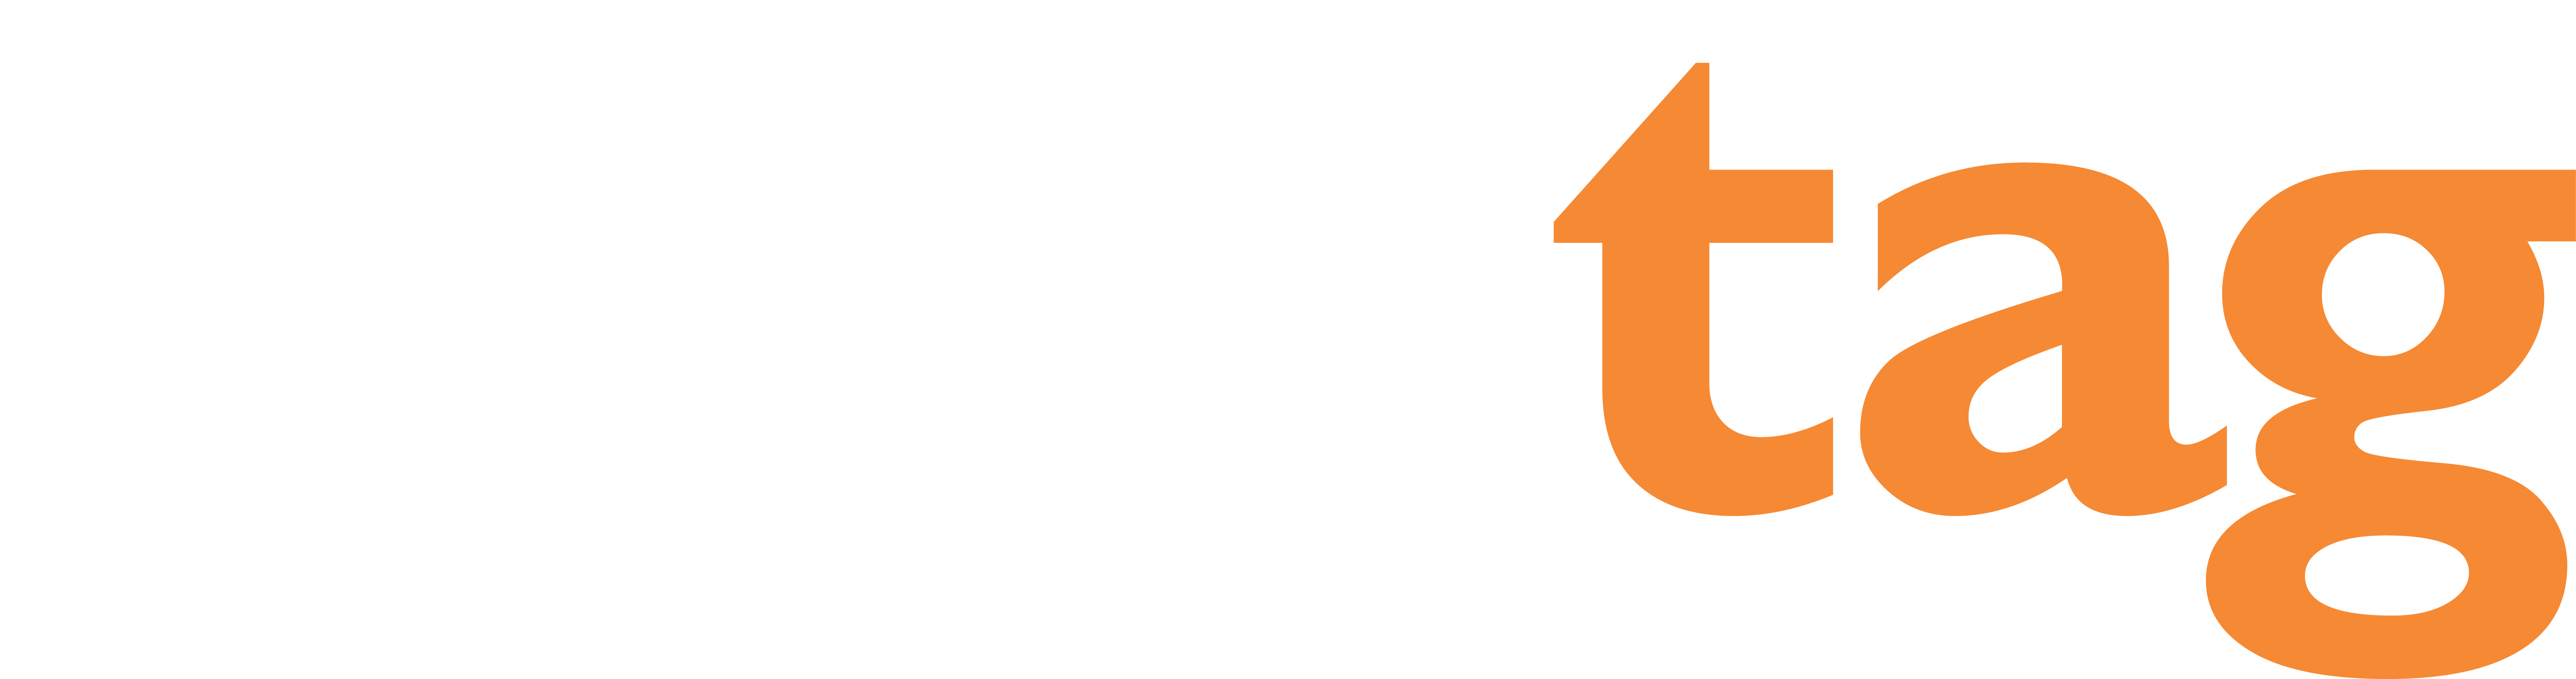 KwikTag by Paymerang